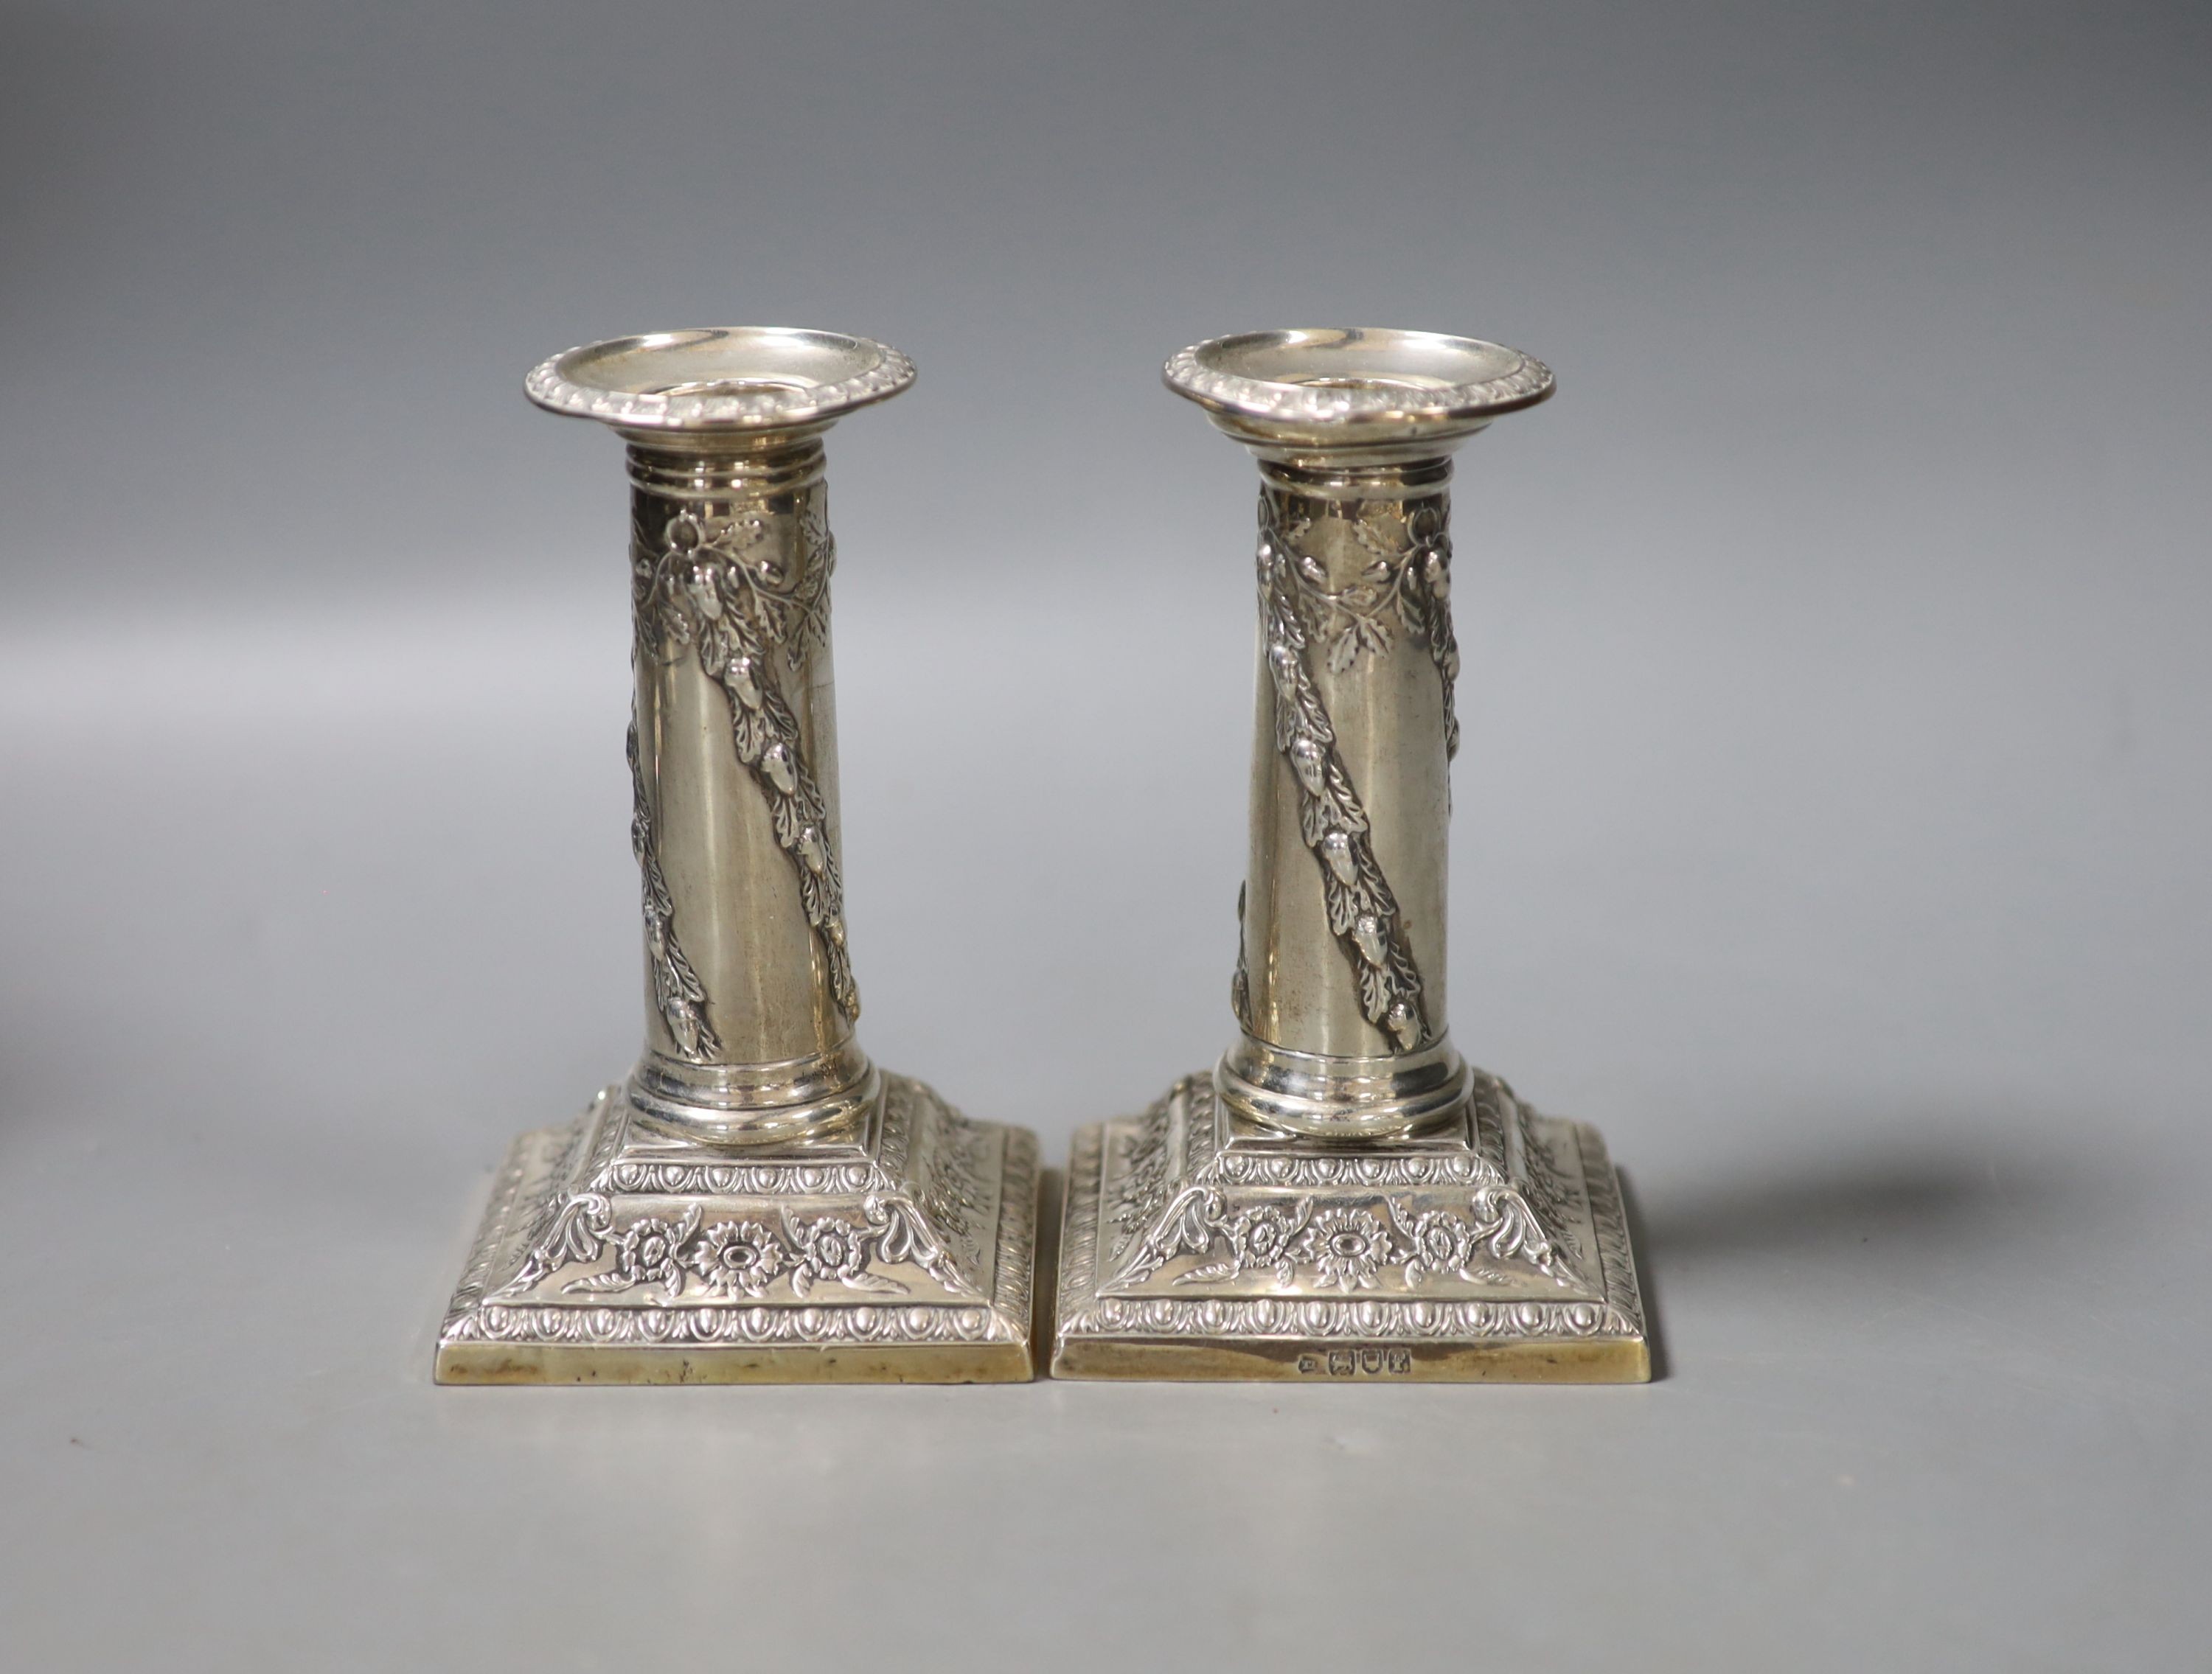 A pair of early 20th century repousse silver dwarf candlesticks, Thomas Bradbury & Sons, Sheffield, 190 & London, 1901, 12.6cm, weighted.